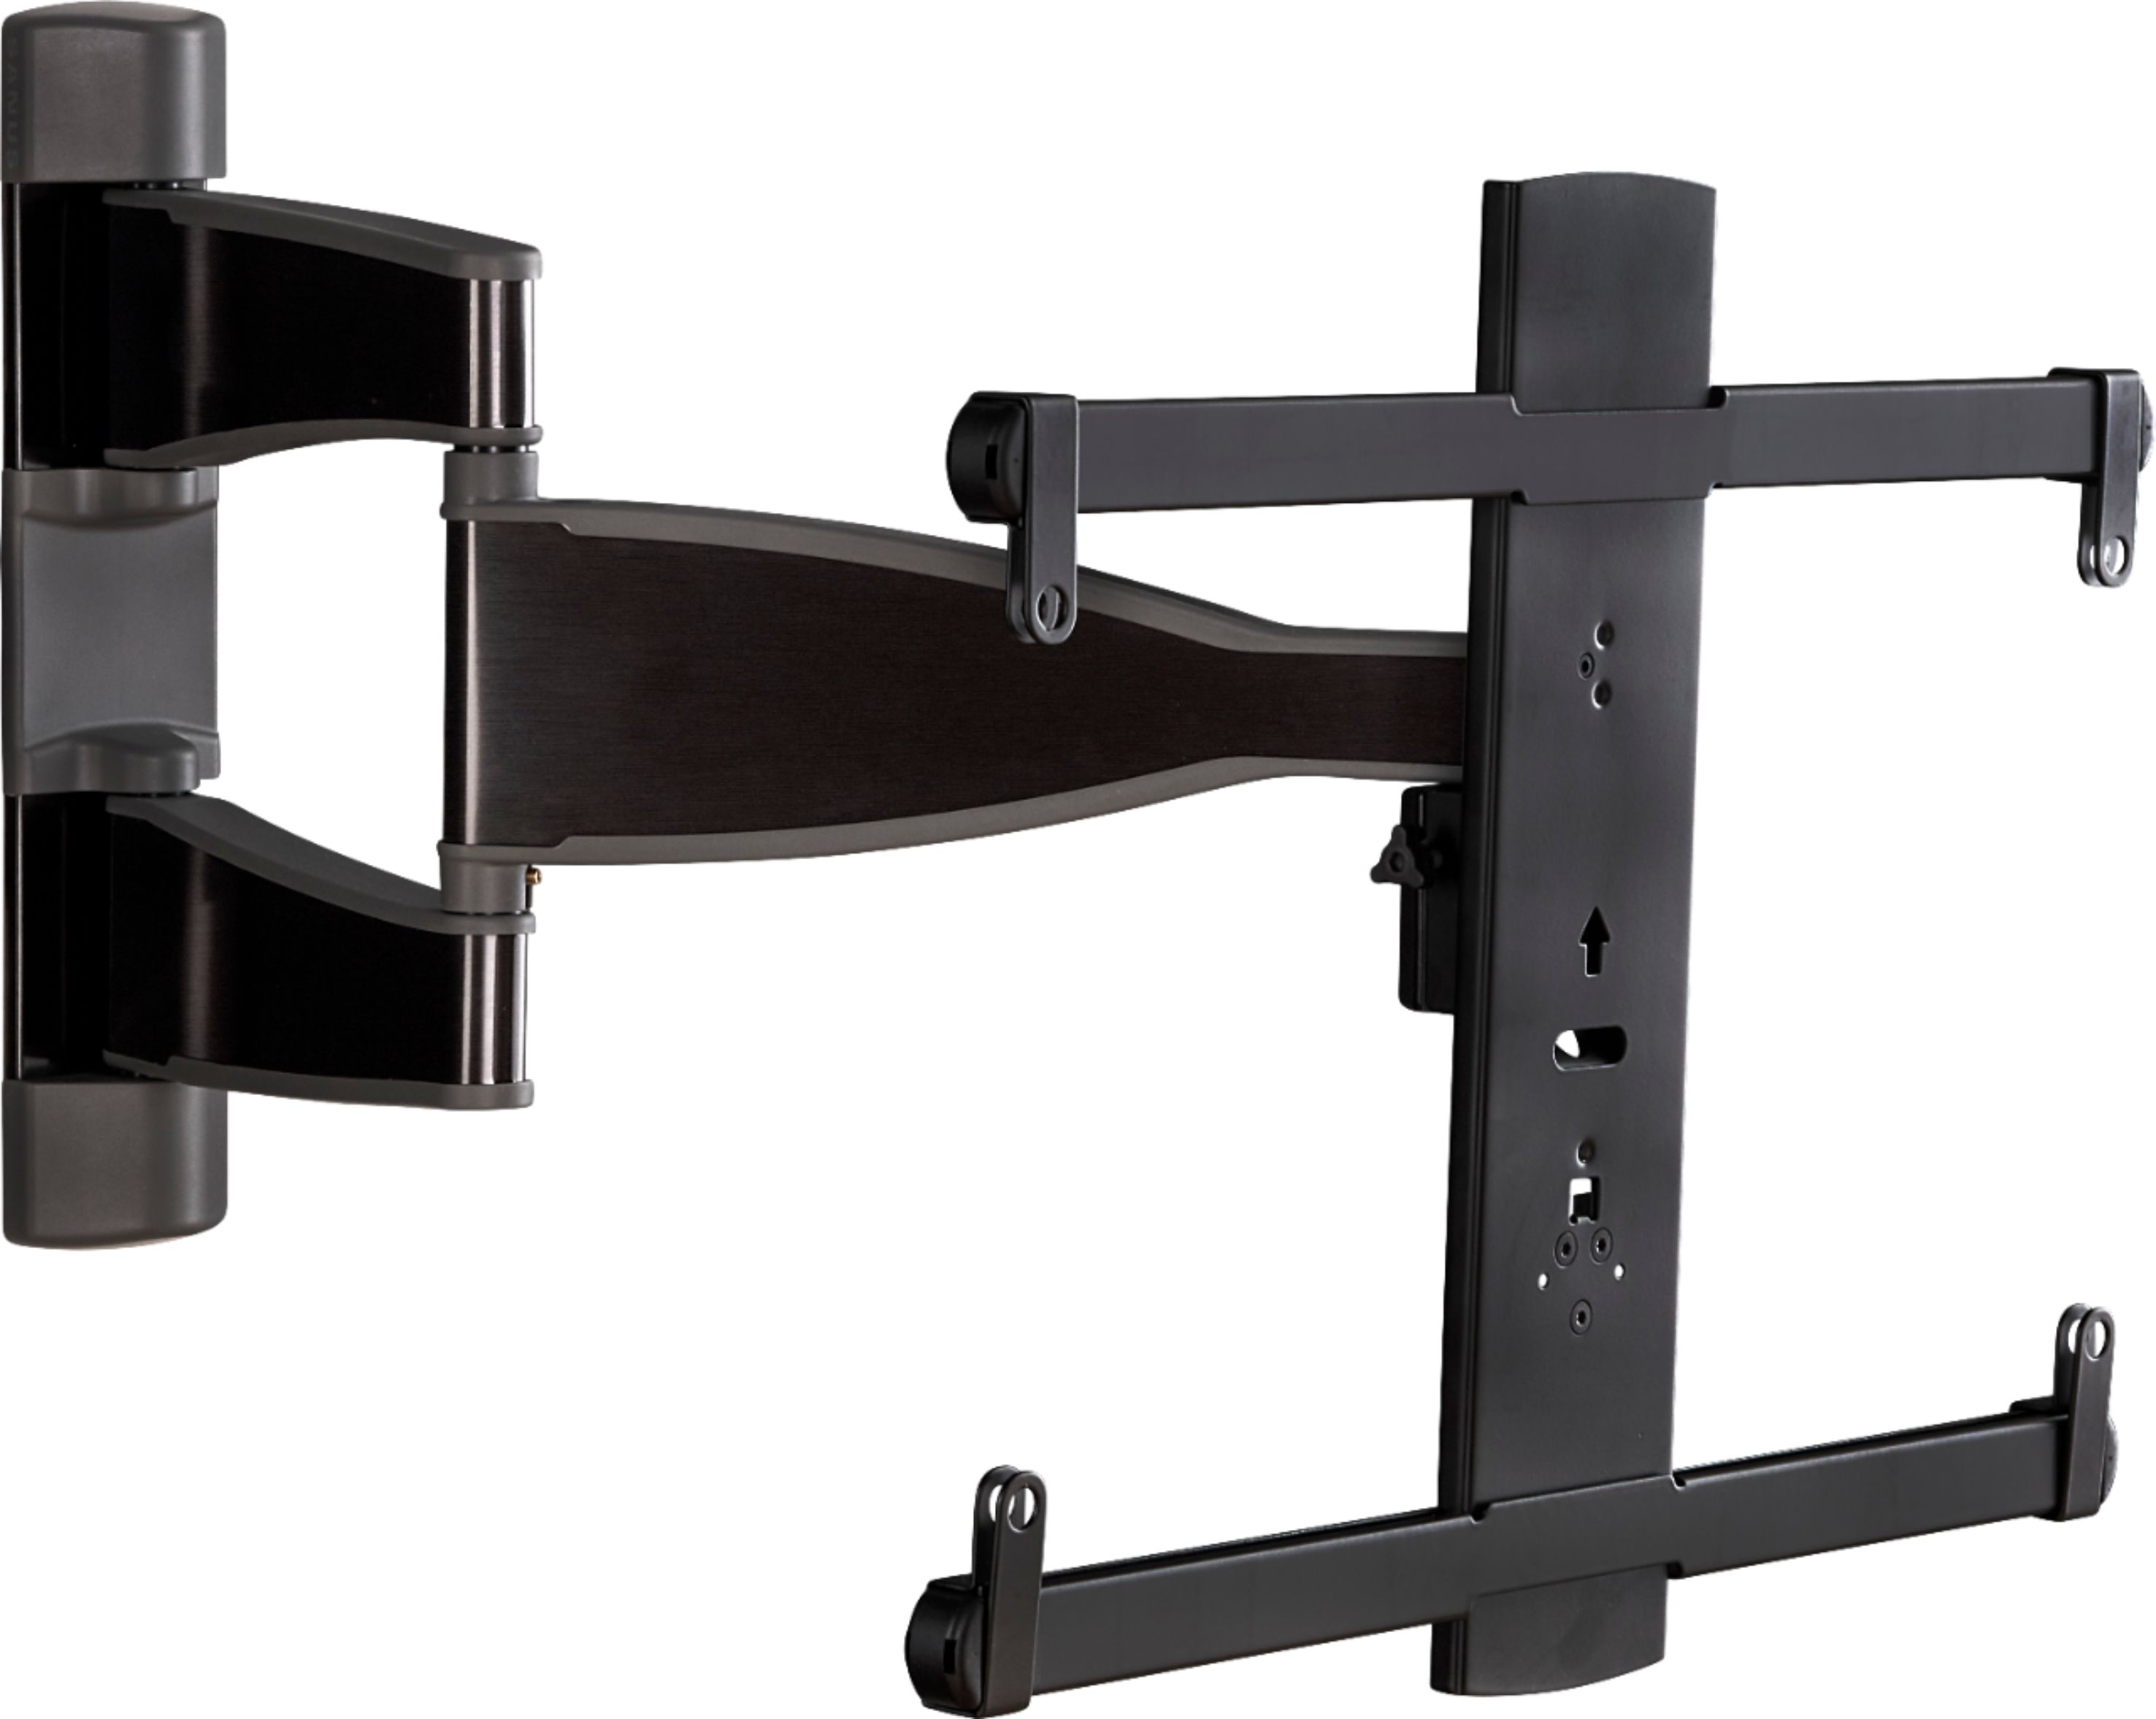 Angle View: Sanus - Premium Series Advanced Full-Motion TV Wall Mount for Most TVs 32"-55" up to 55 lbs - Black Brushed Metal